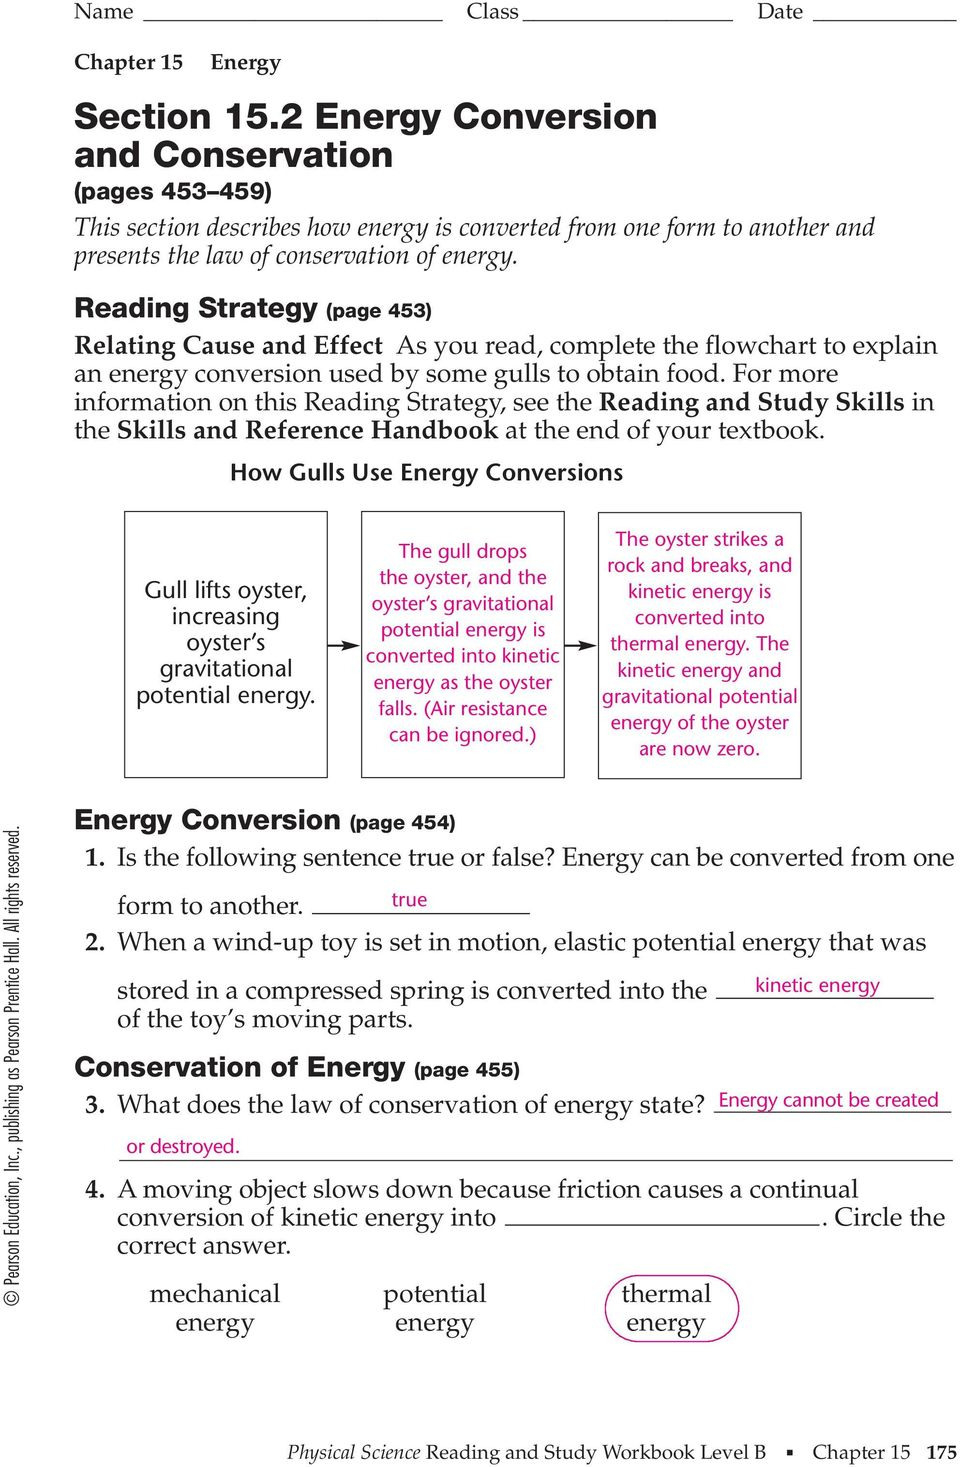 section-15-2-energy-conversion-and-conservation-worksheet-answers-db